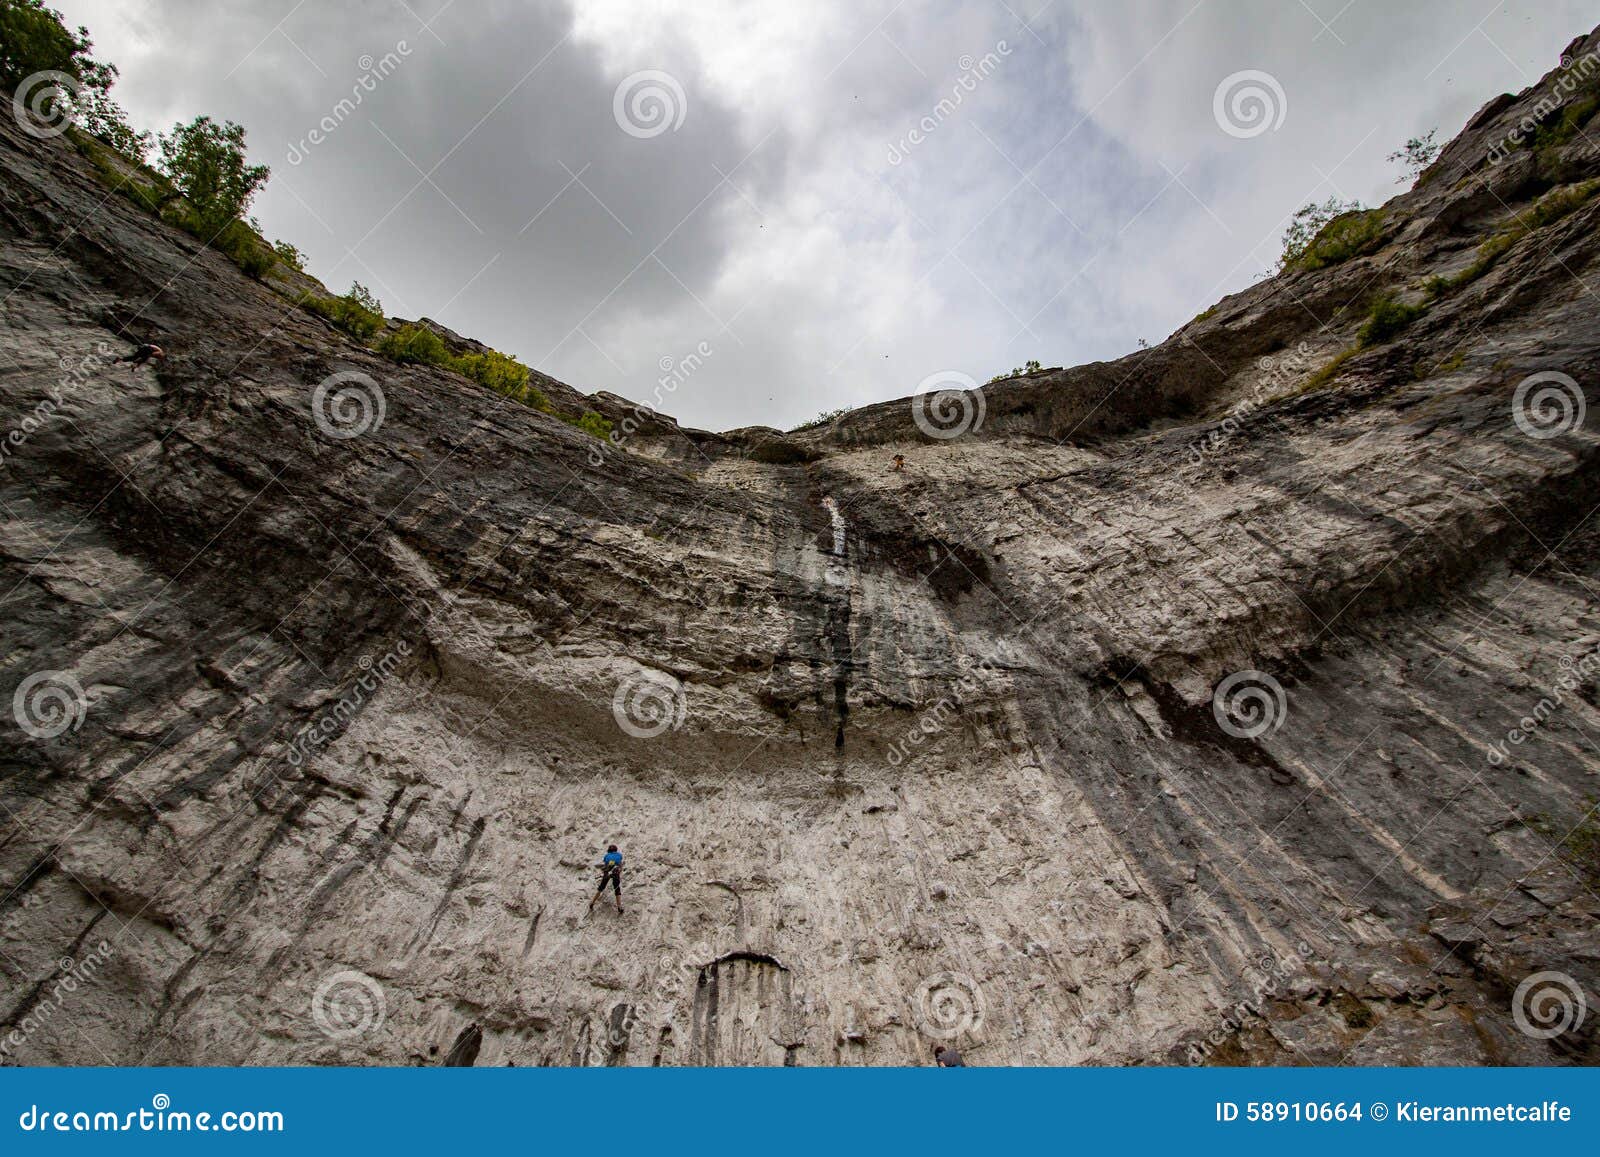 bottom-looking-up-malham-cove-limestone-cliff-outcrop-escarpement-to-fluffy-clouds-top-lone-rock-climber-ascending-58910664.jpg